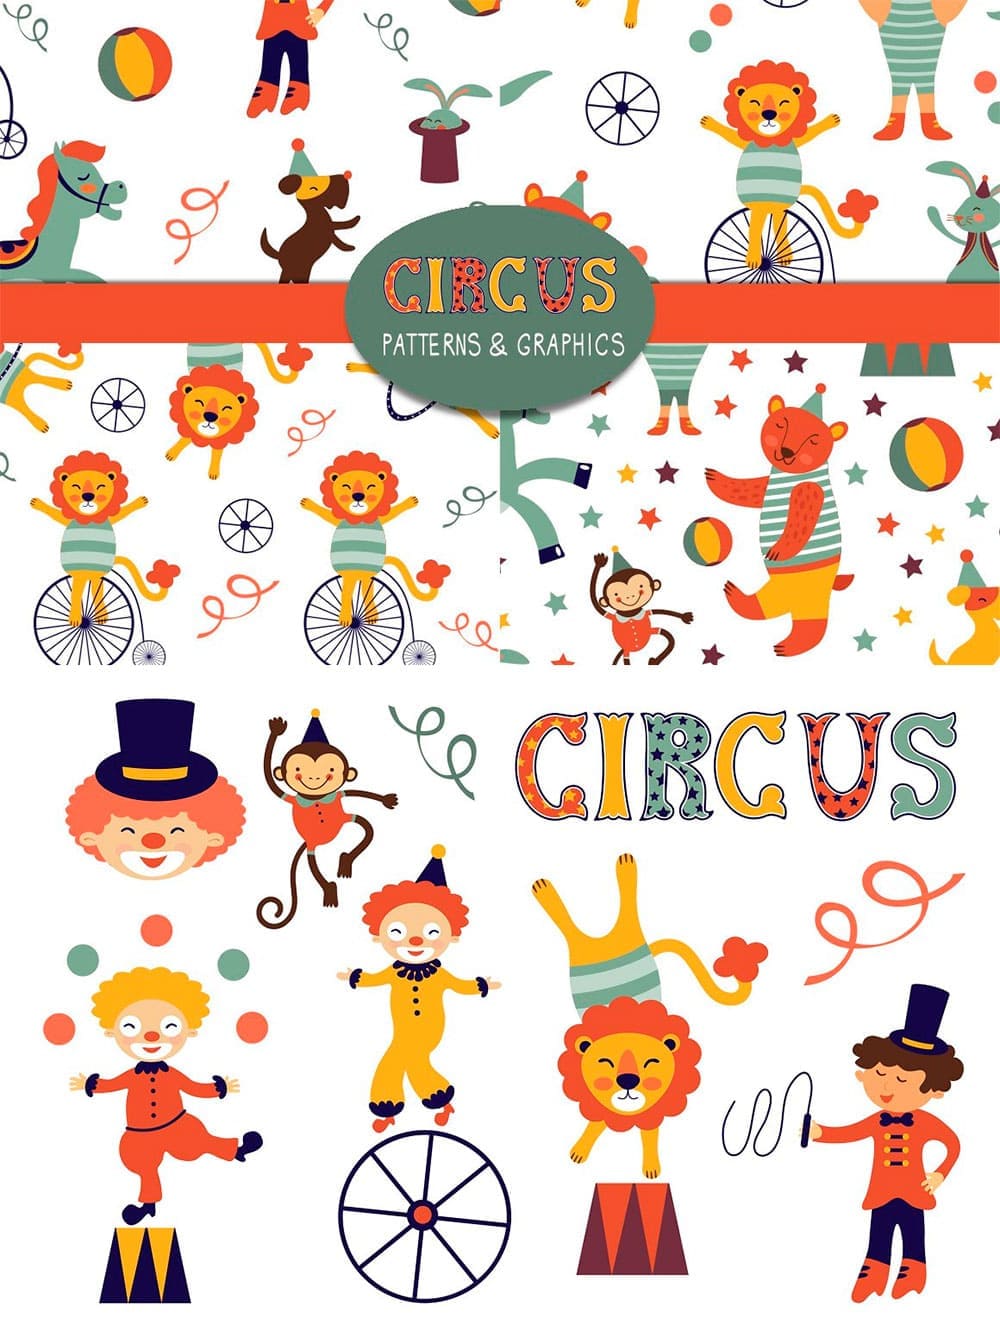 Circus graphics and patterns, picture for pinterest.